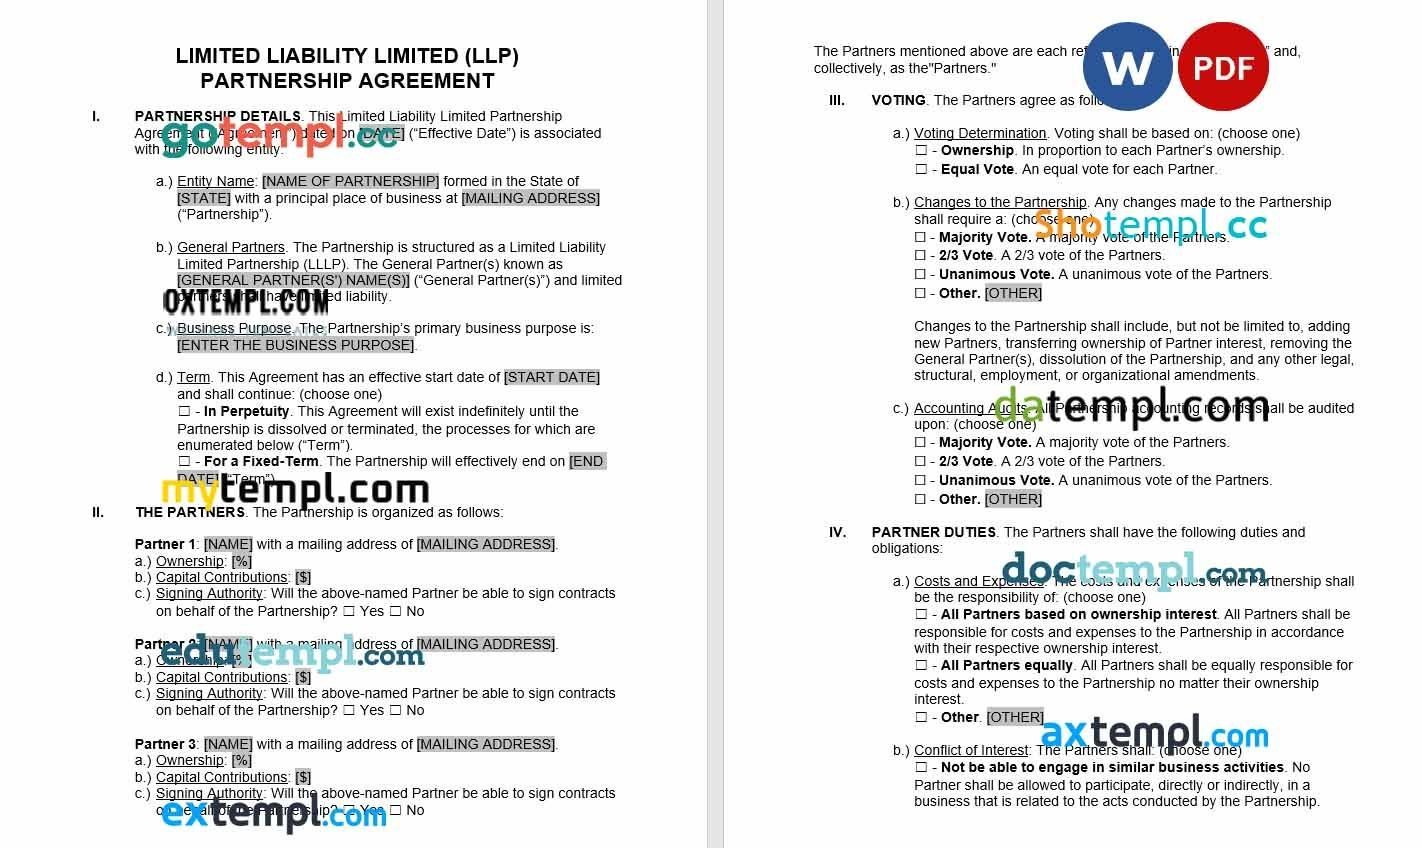 Limited Liability Limited Partnership LLLP Agreement Word example, fully editable